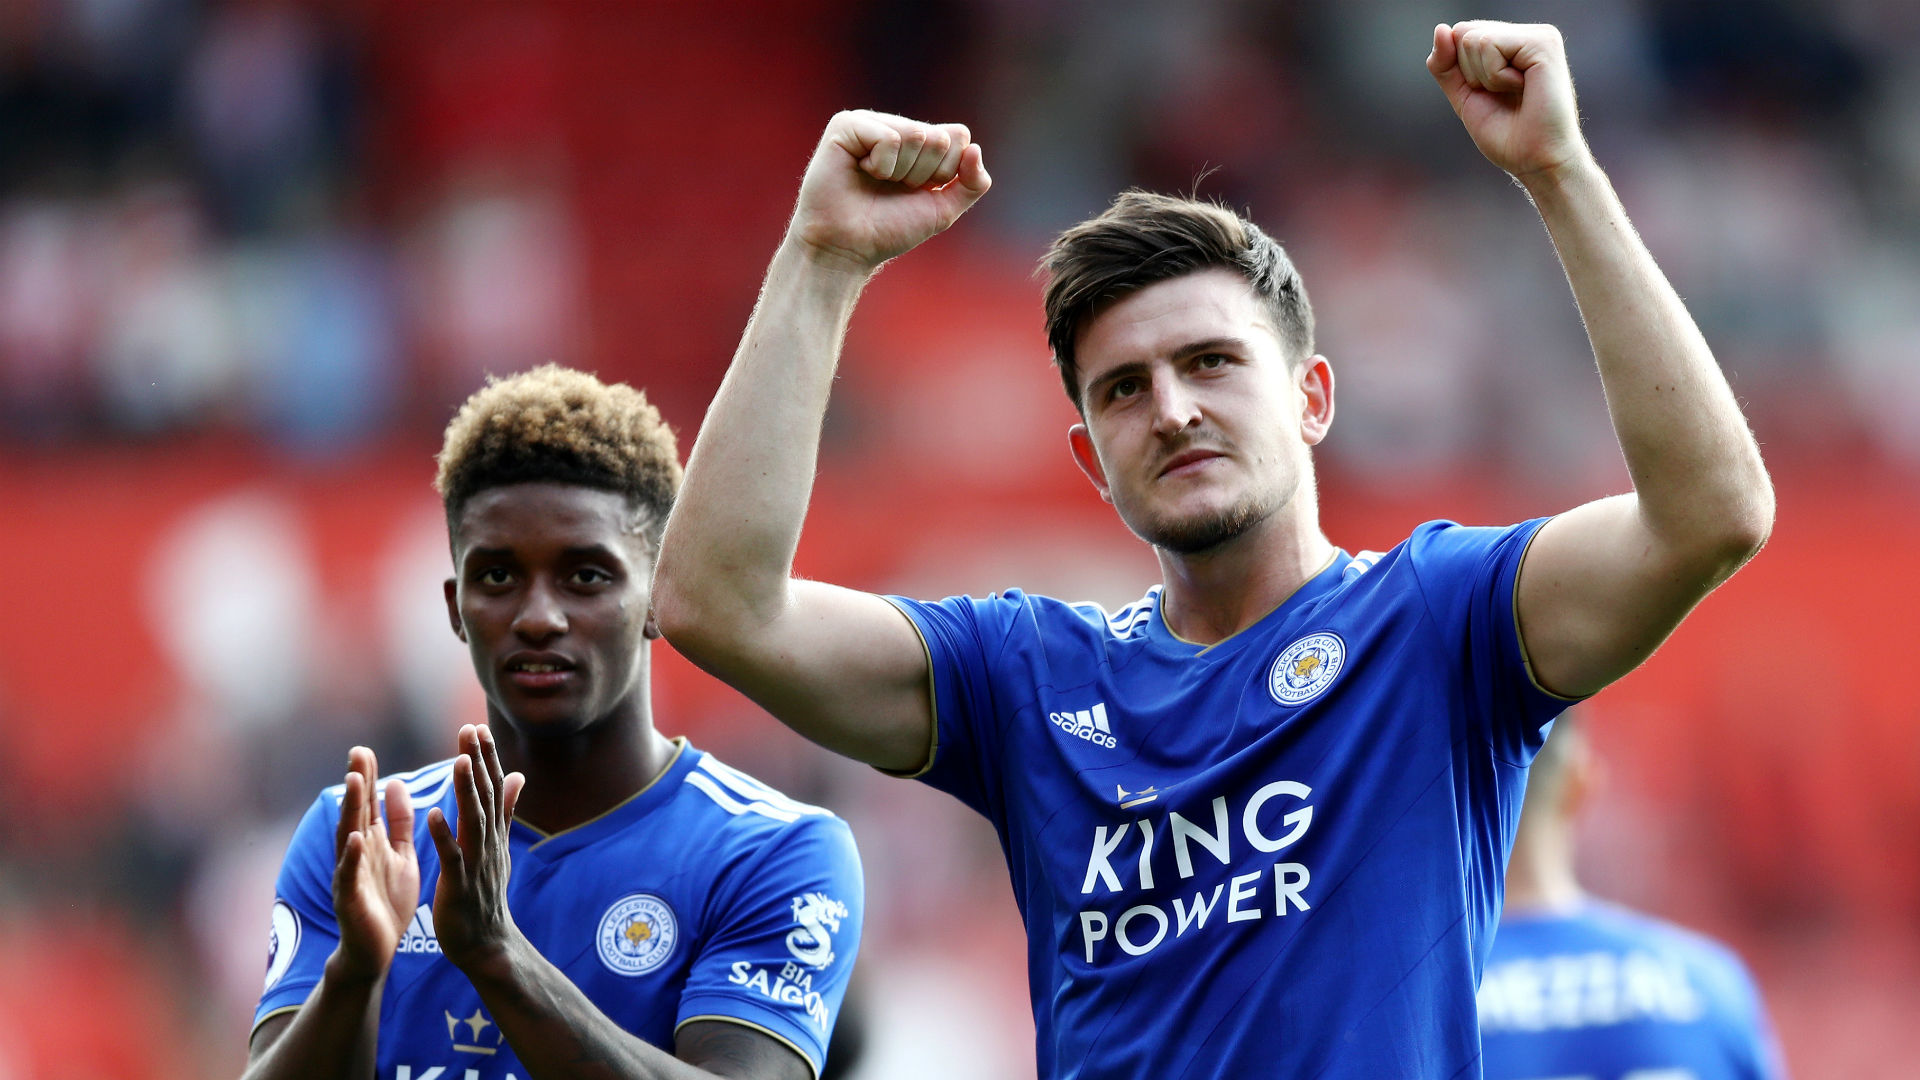 Defender respects Leicester after blocked Manchester United move